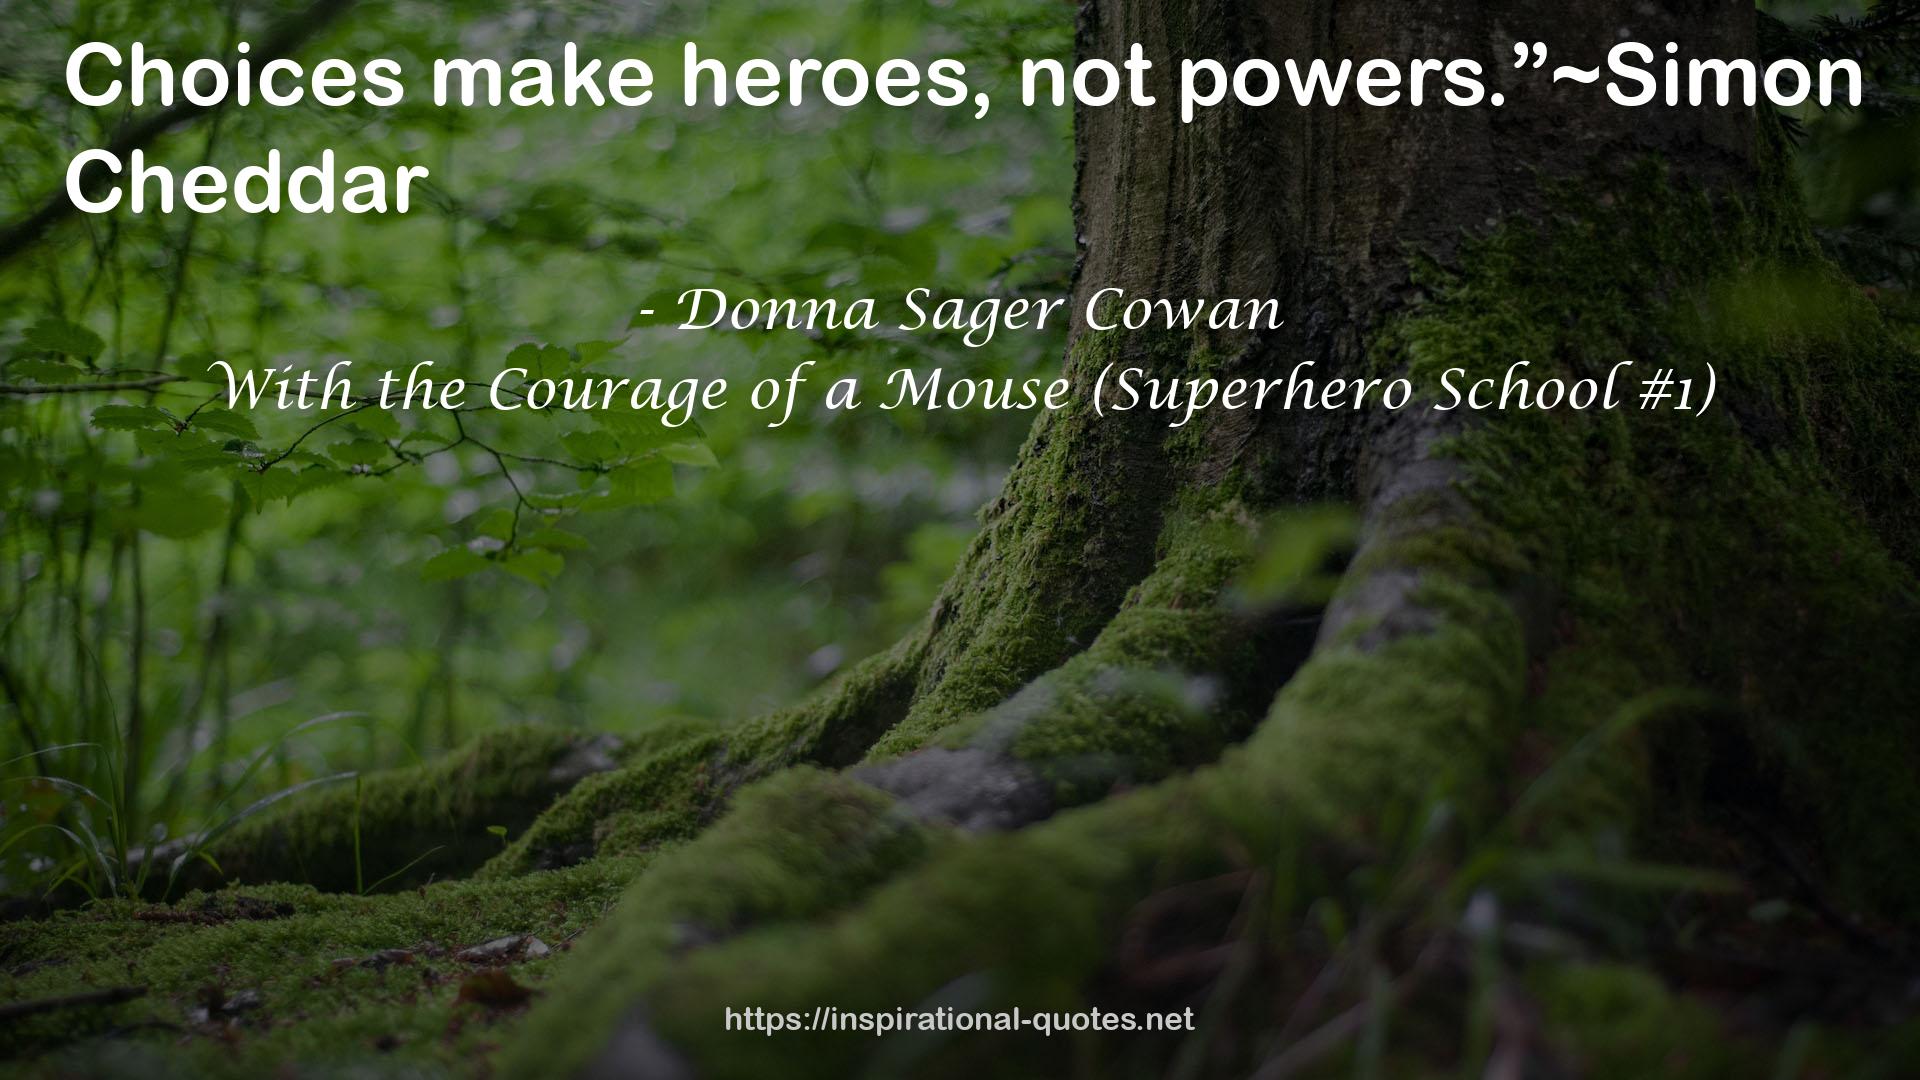 With the Courage of a Mouse (Superhero School #1) QUOTES